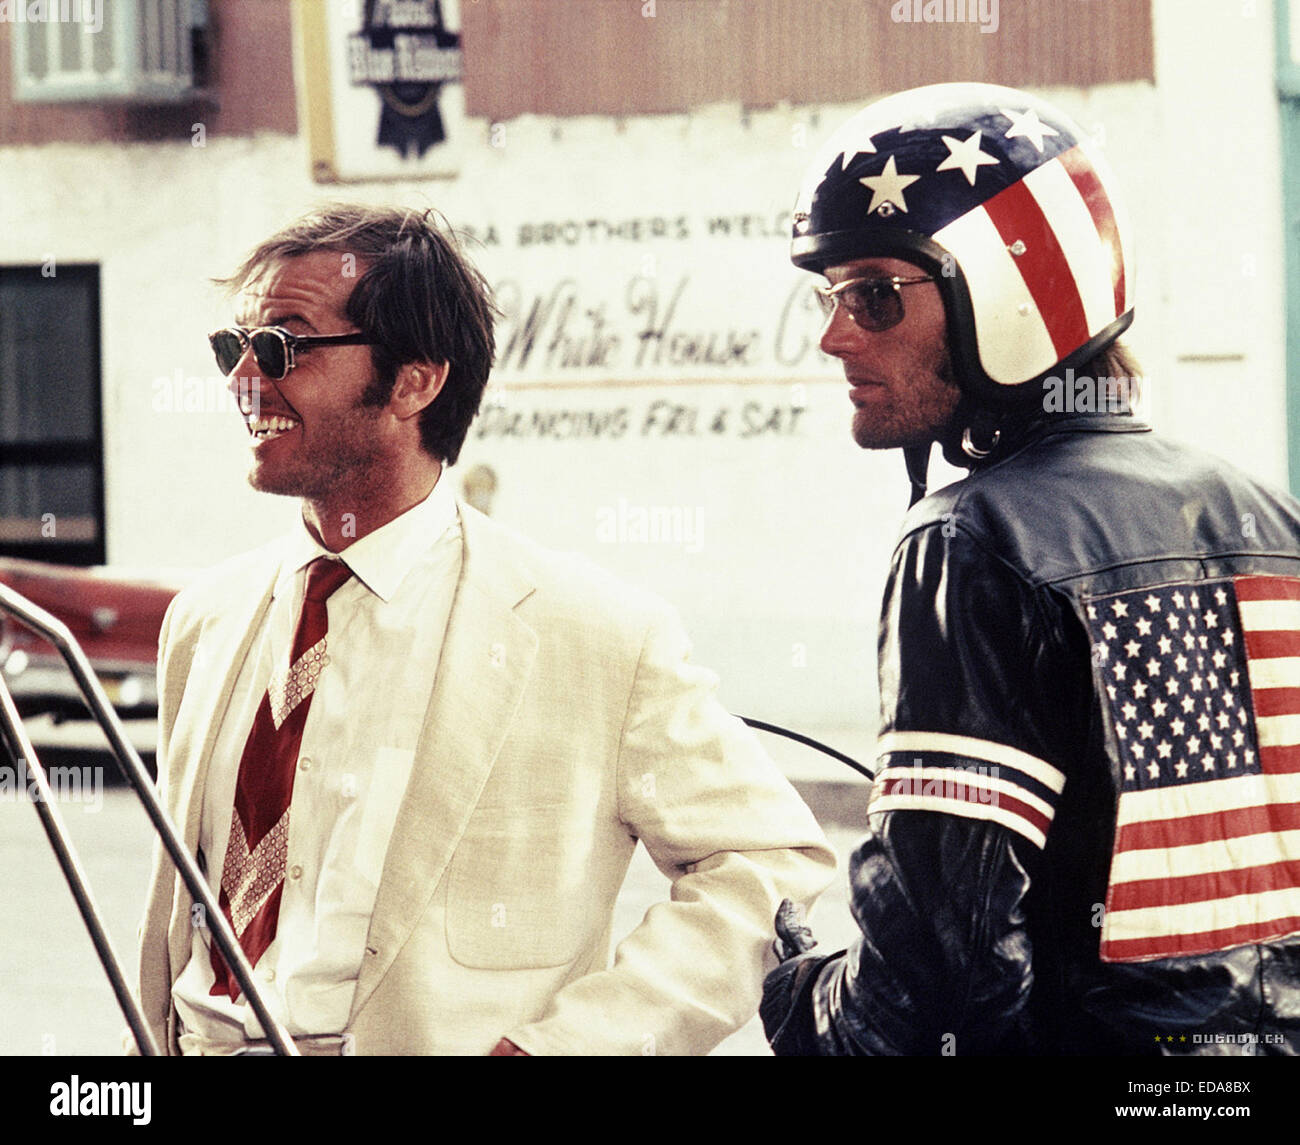 Easy Rider is a 1969 American road movie written by Peter Fonda, Dennis Hopper, and Terry Southern, produced by Fonda and directed by Hopper. It tells the story of two bikers (played by Fonda and Hopper) who travel through the American Southwest and South. Stock Photo